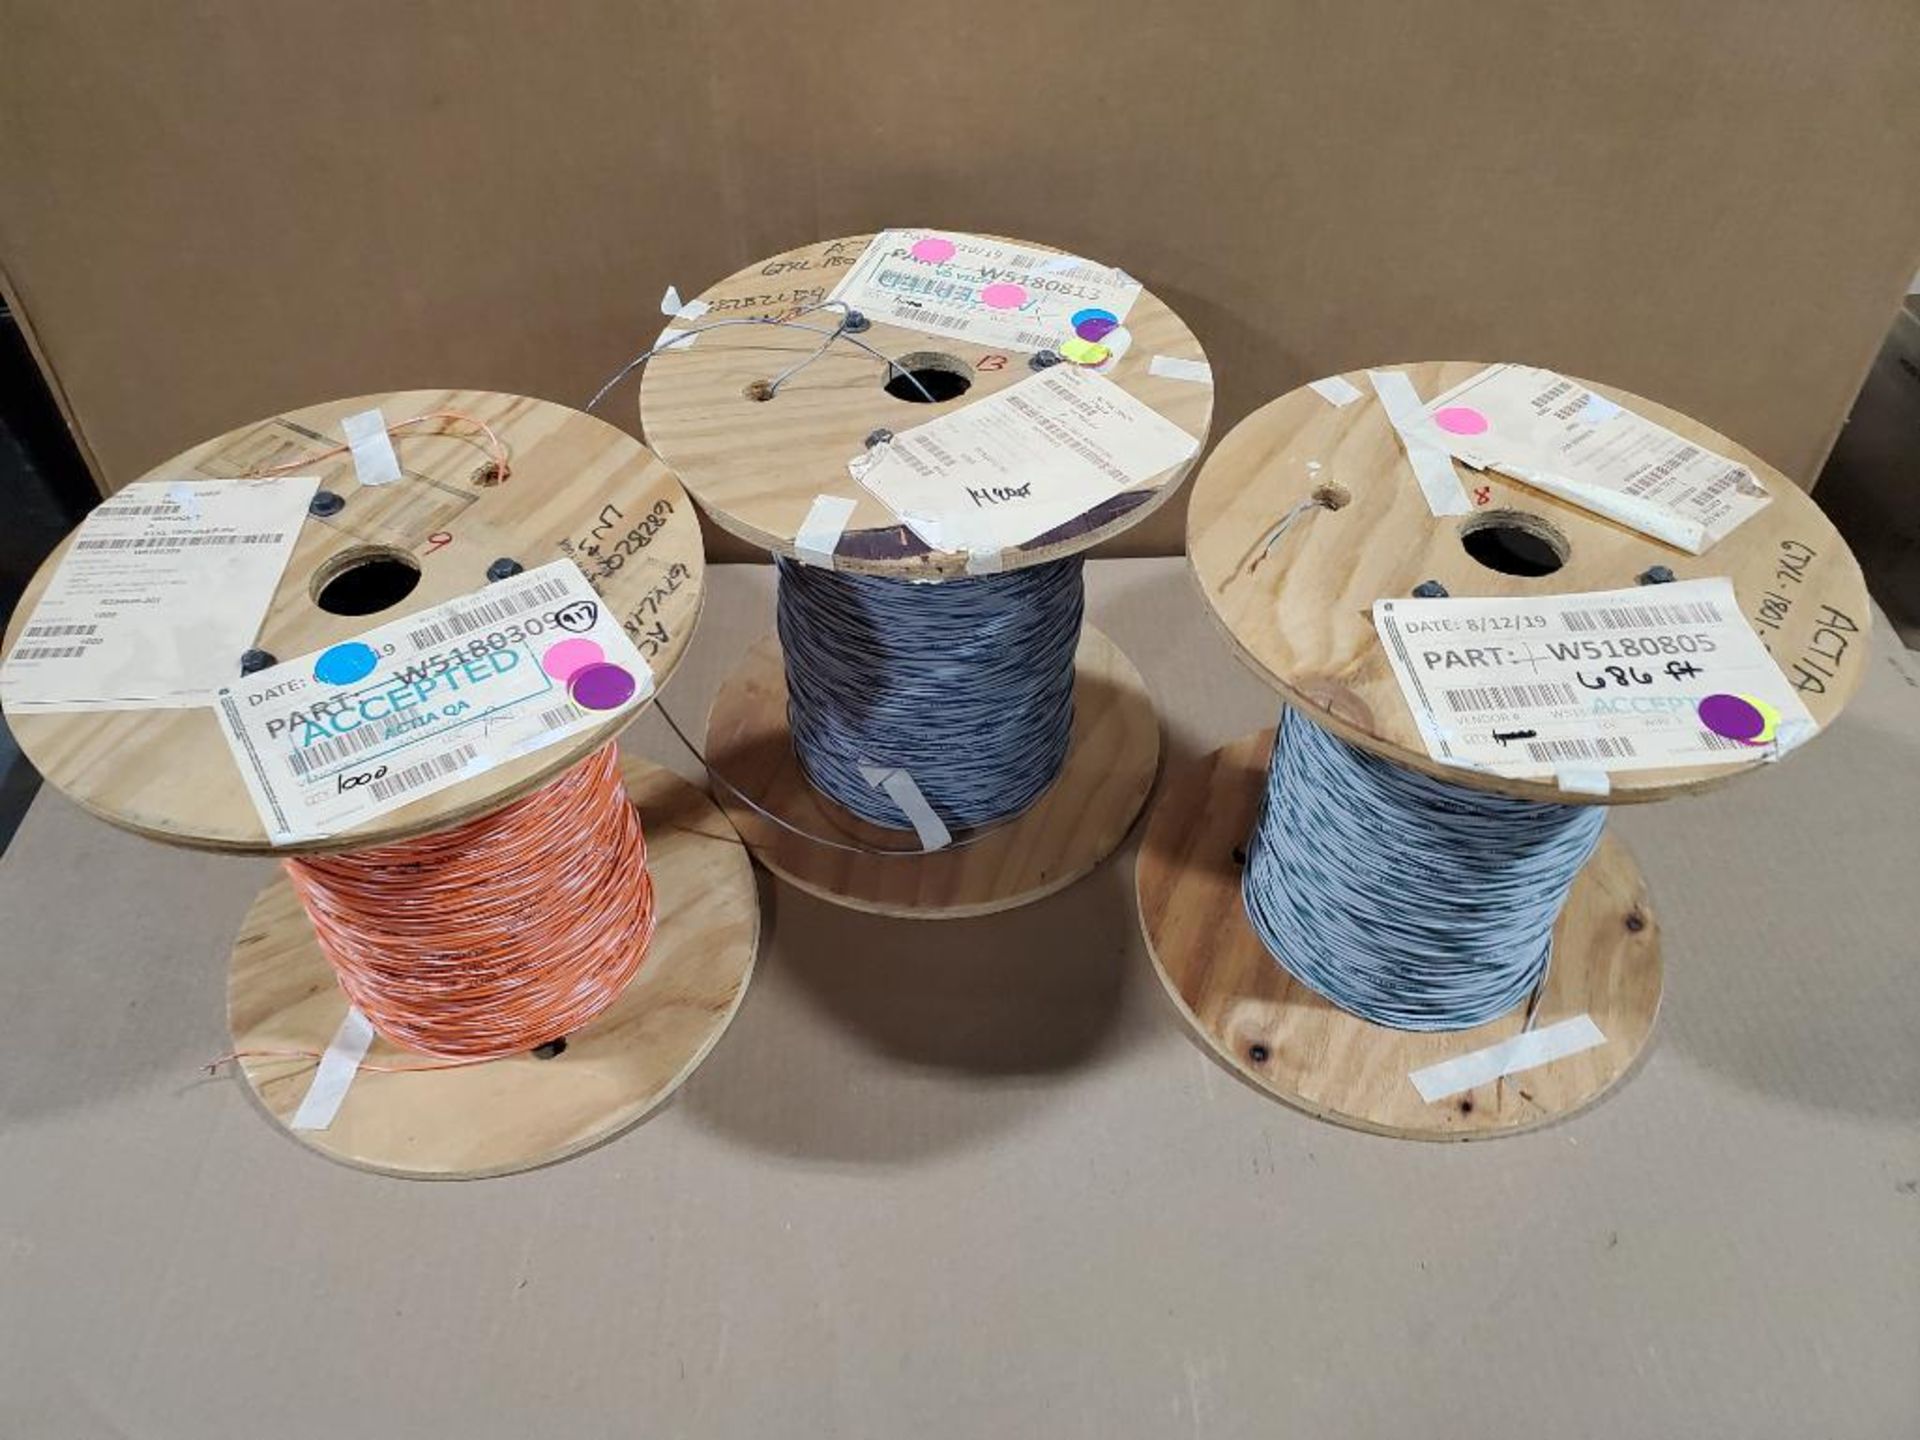 Qty 3 - 18 awg assorted copper wire. 30lbs total gross combined weight for all rolls. - Image 8 of 8